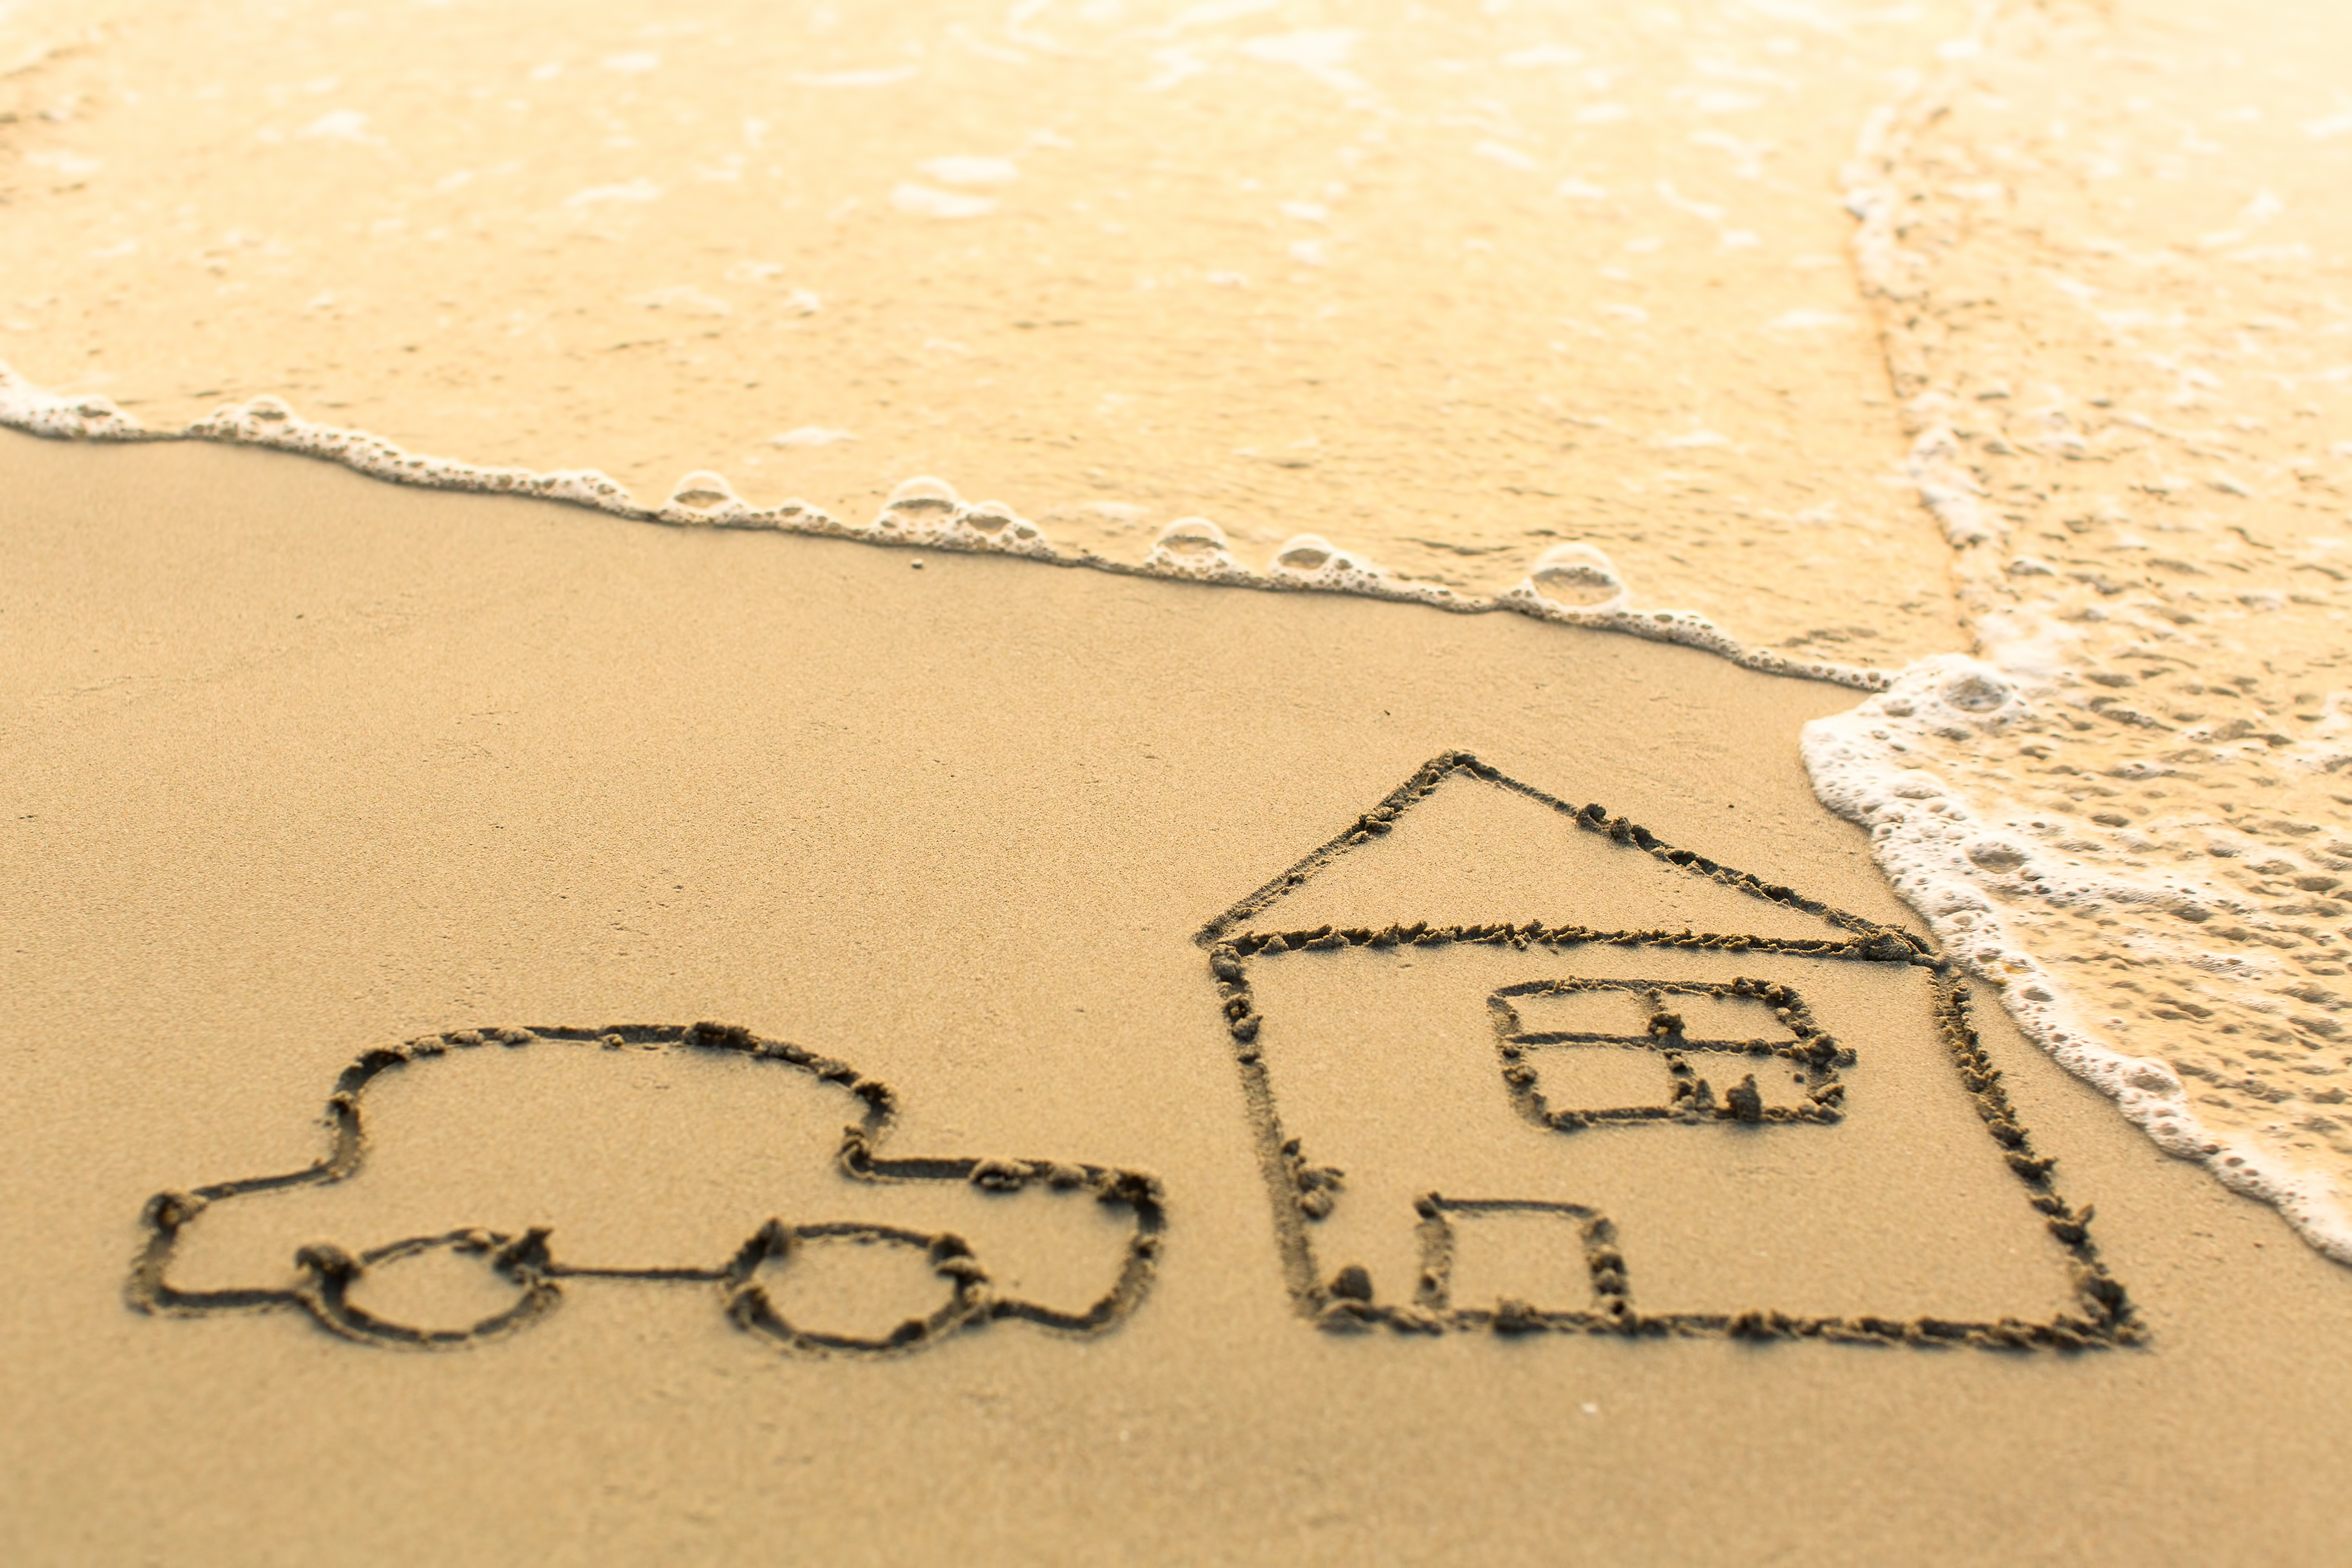 House and a Car drawing on the beach sand with the soft wave.